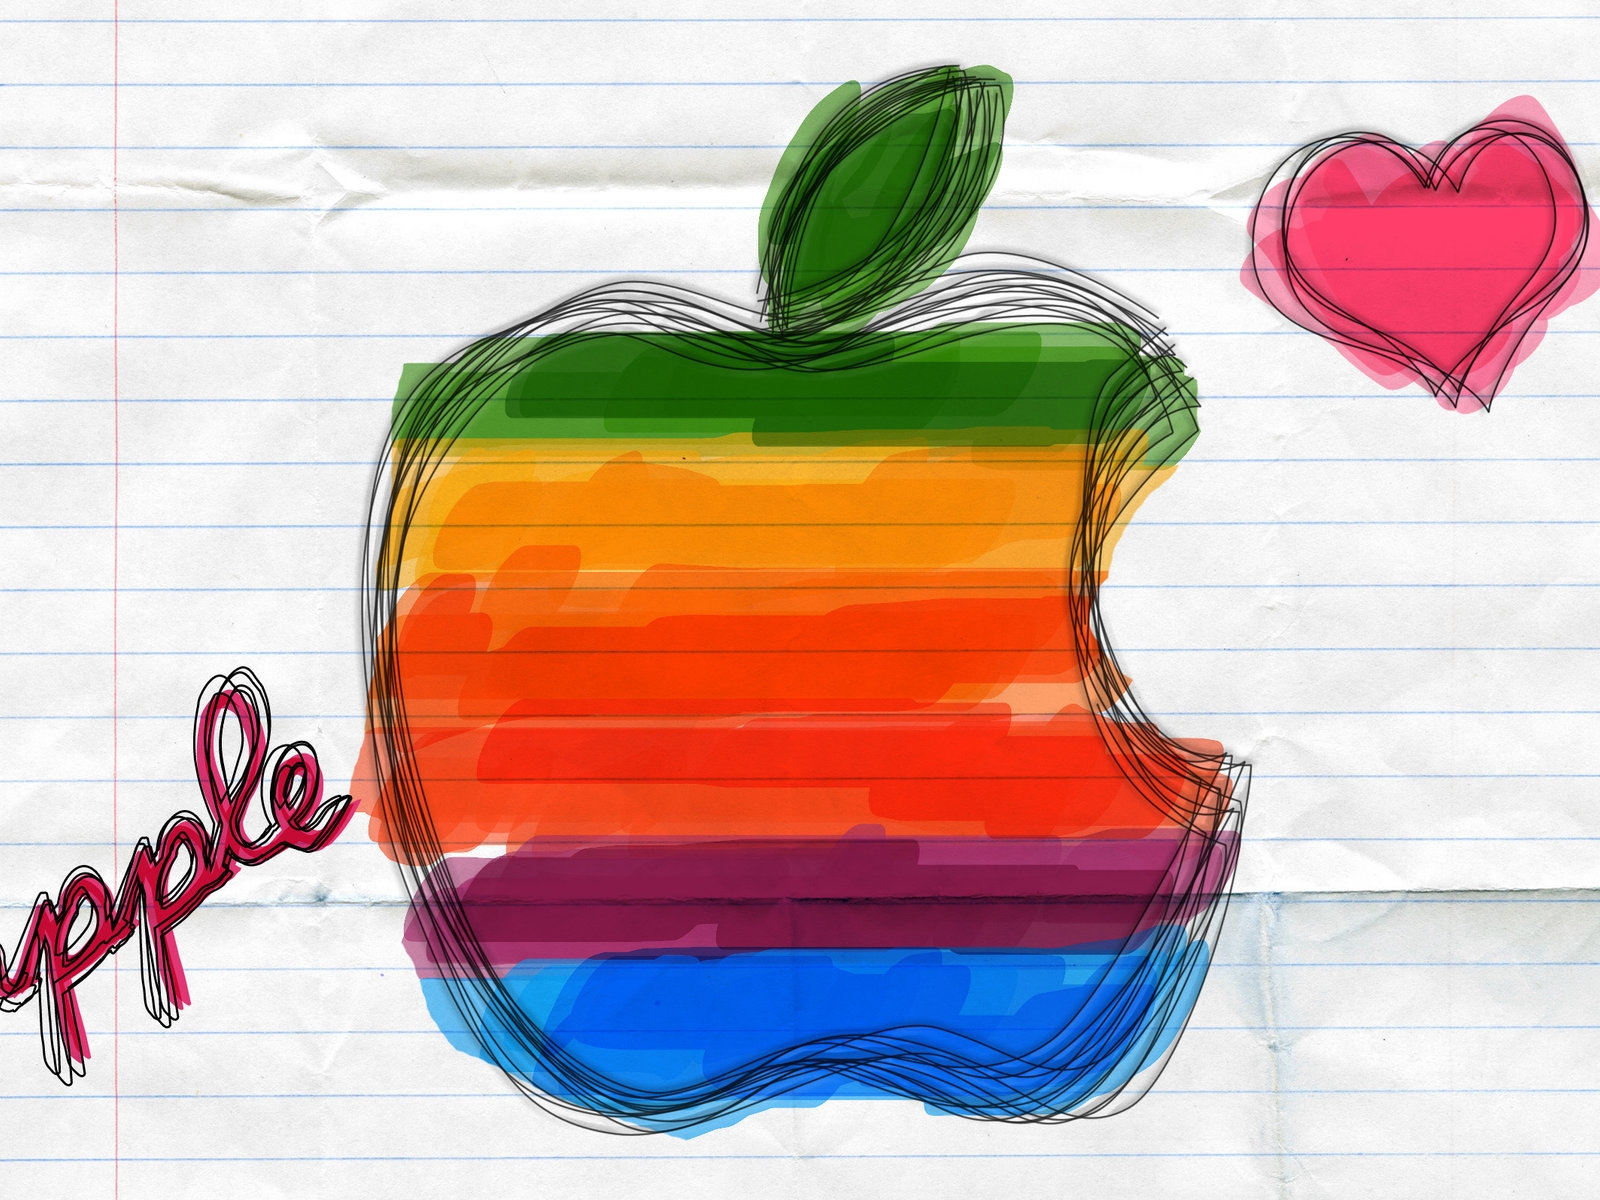 Colourful Apple logo for 1600 x 1200 resolution